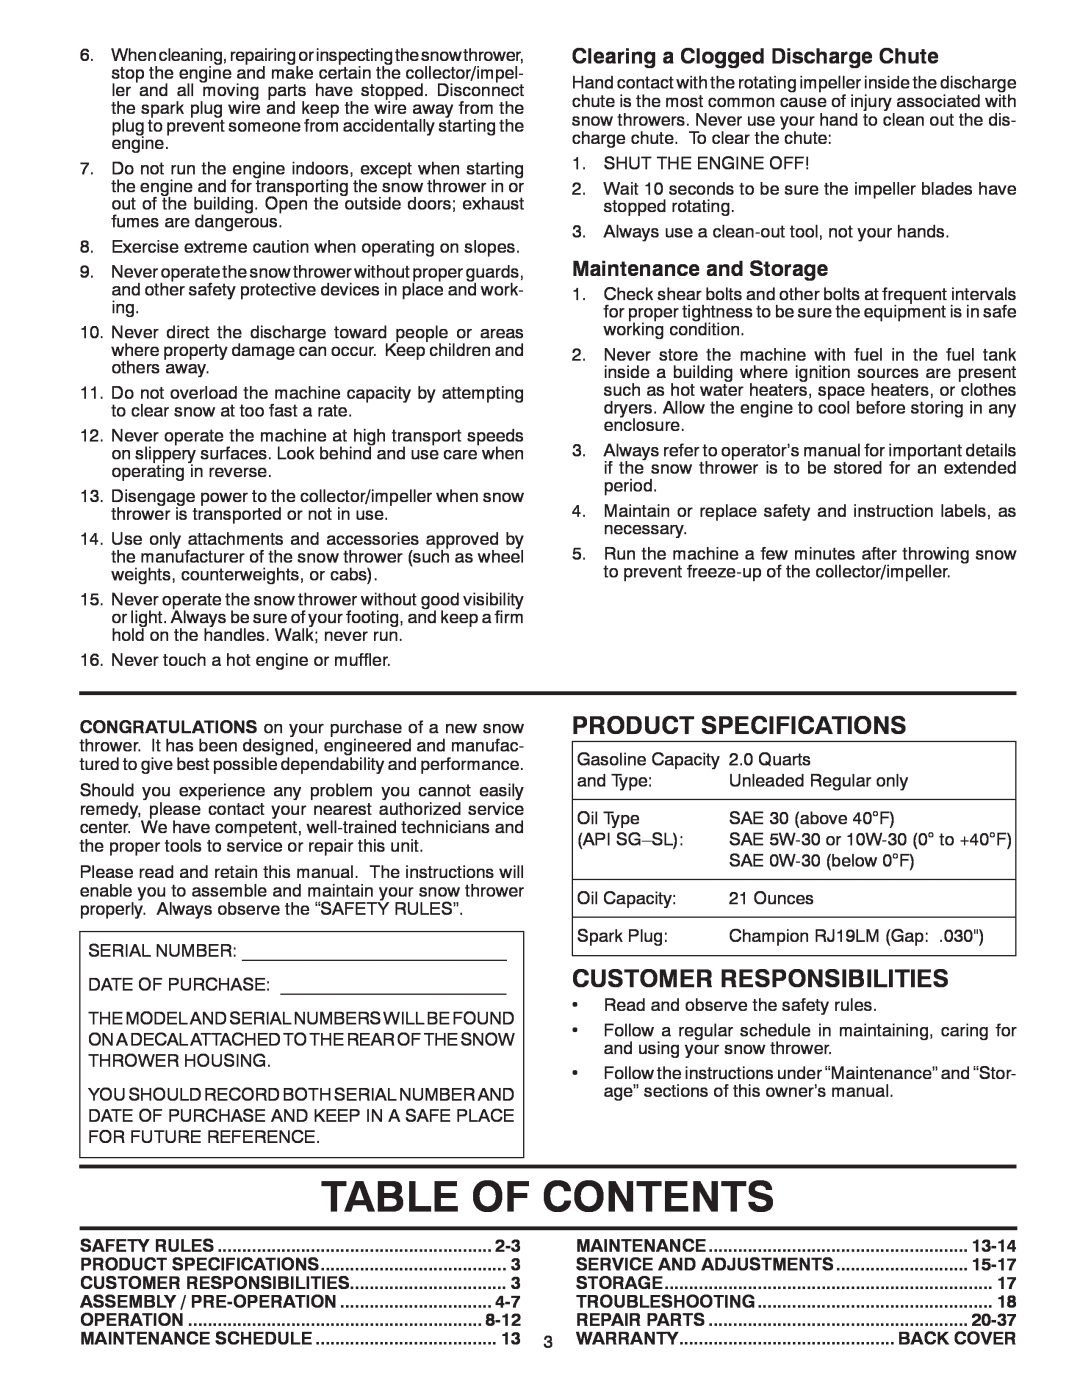 Poulan 421283 Table Of Contents, Product Specifications, Customer Responsibilities, Clearing a Clogged Discharge Chute 